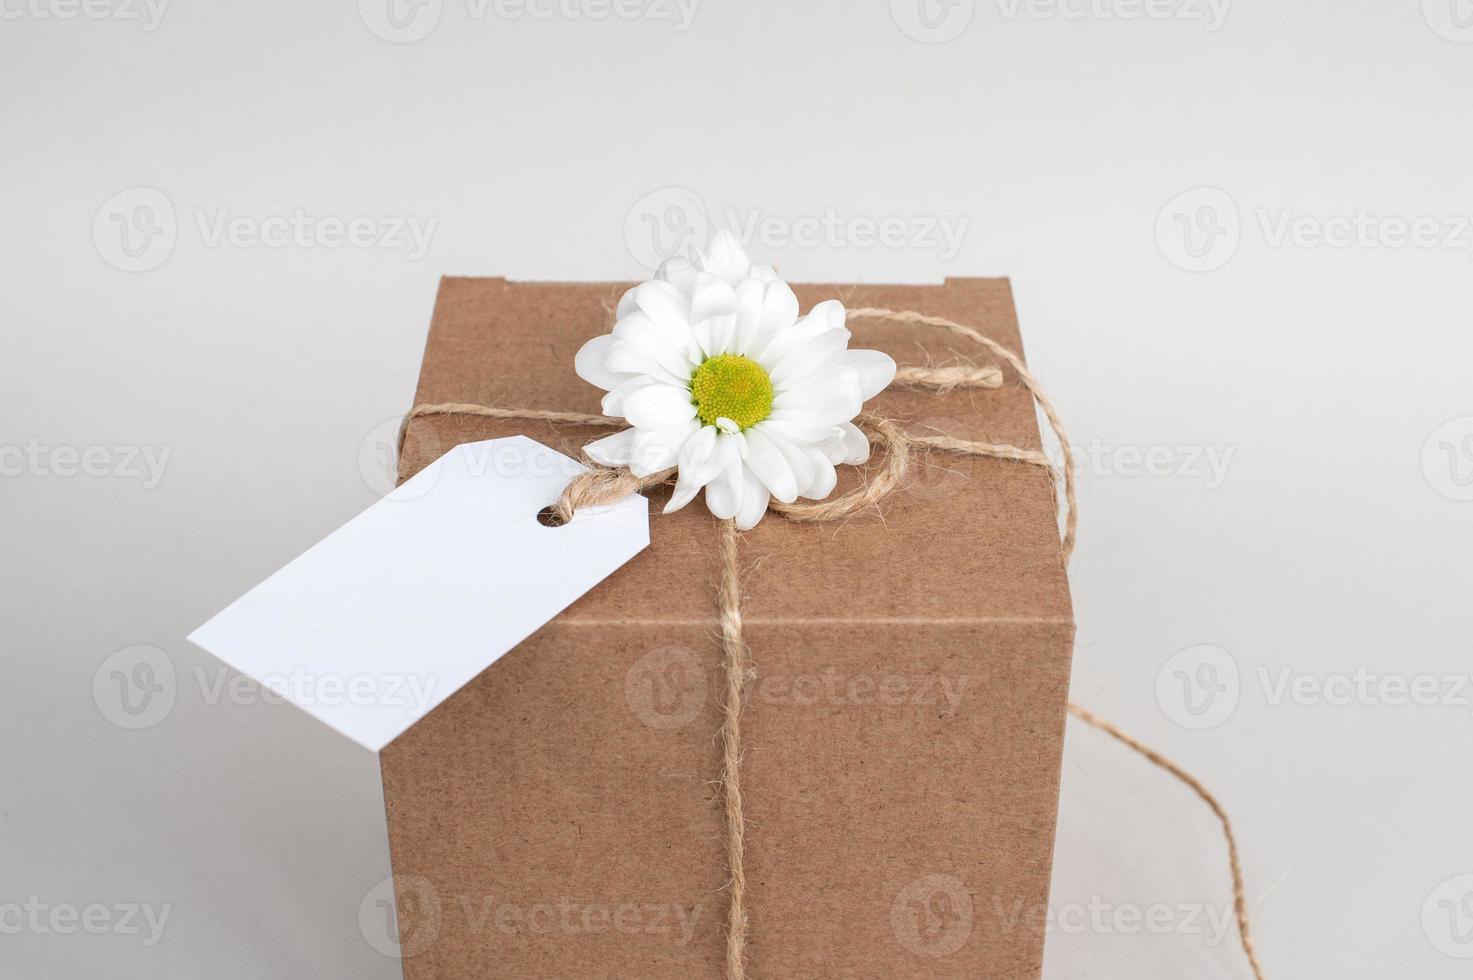 Kraft box with empty label, gift package, living flower, white cardboard label with thin rope cord photo